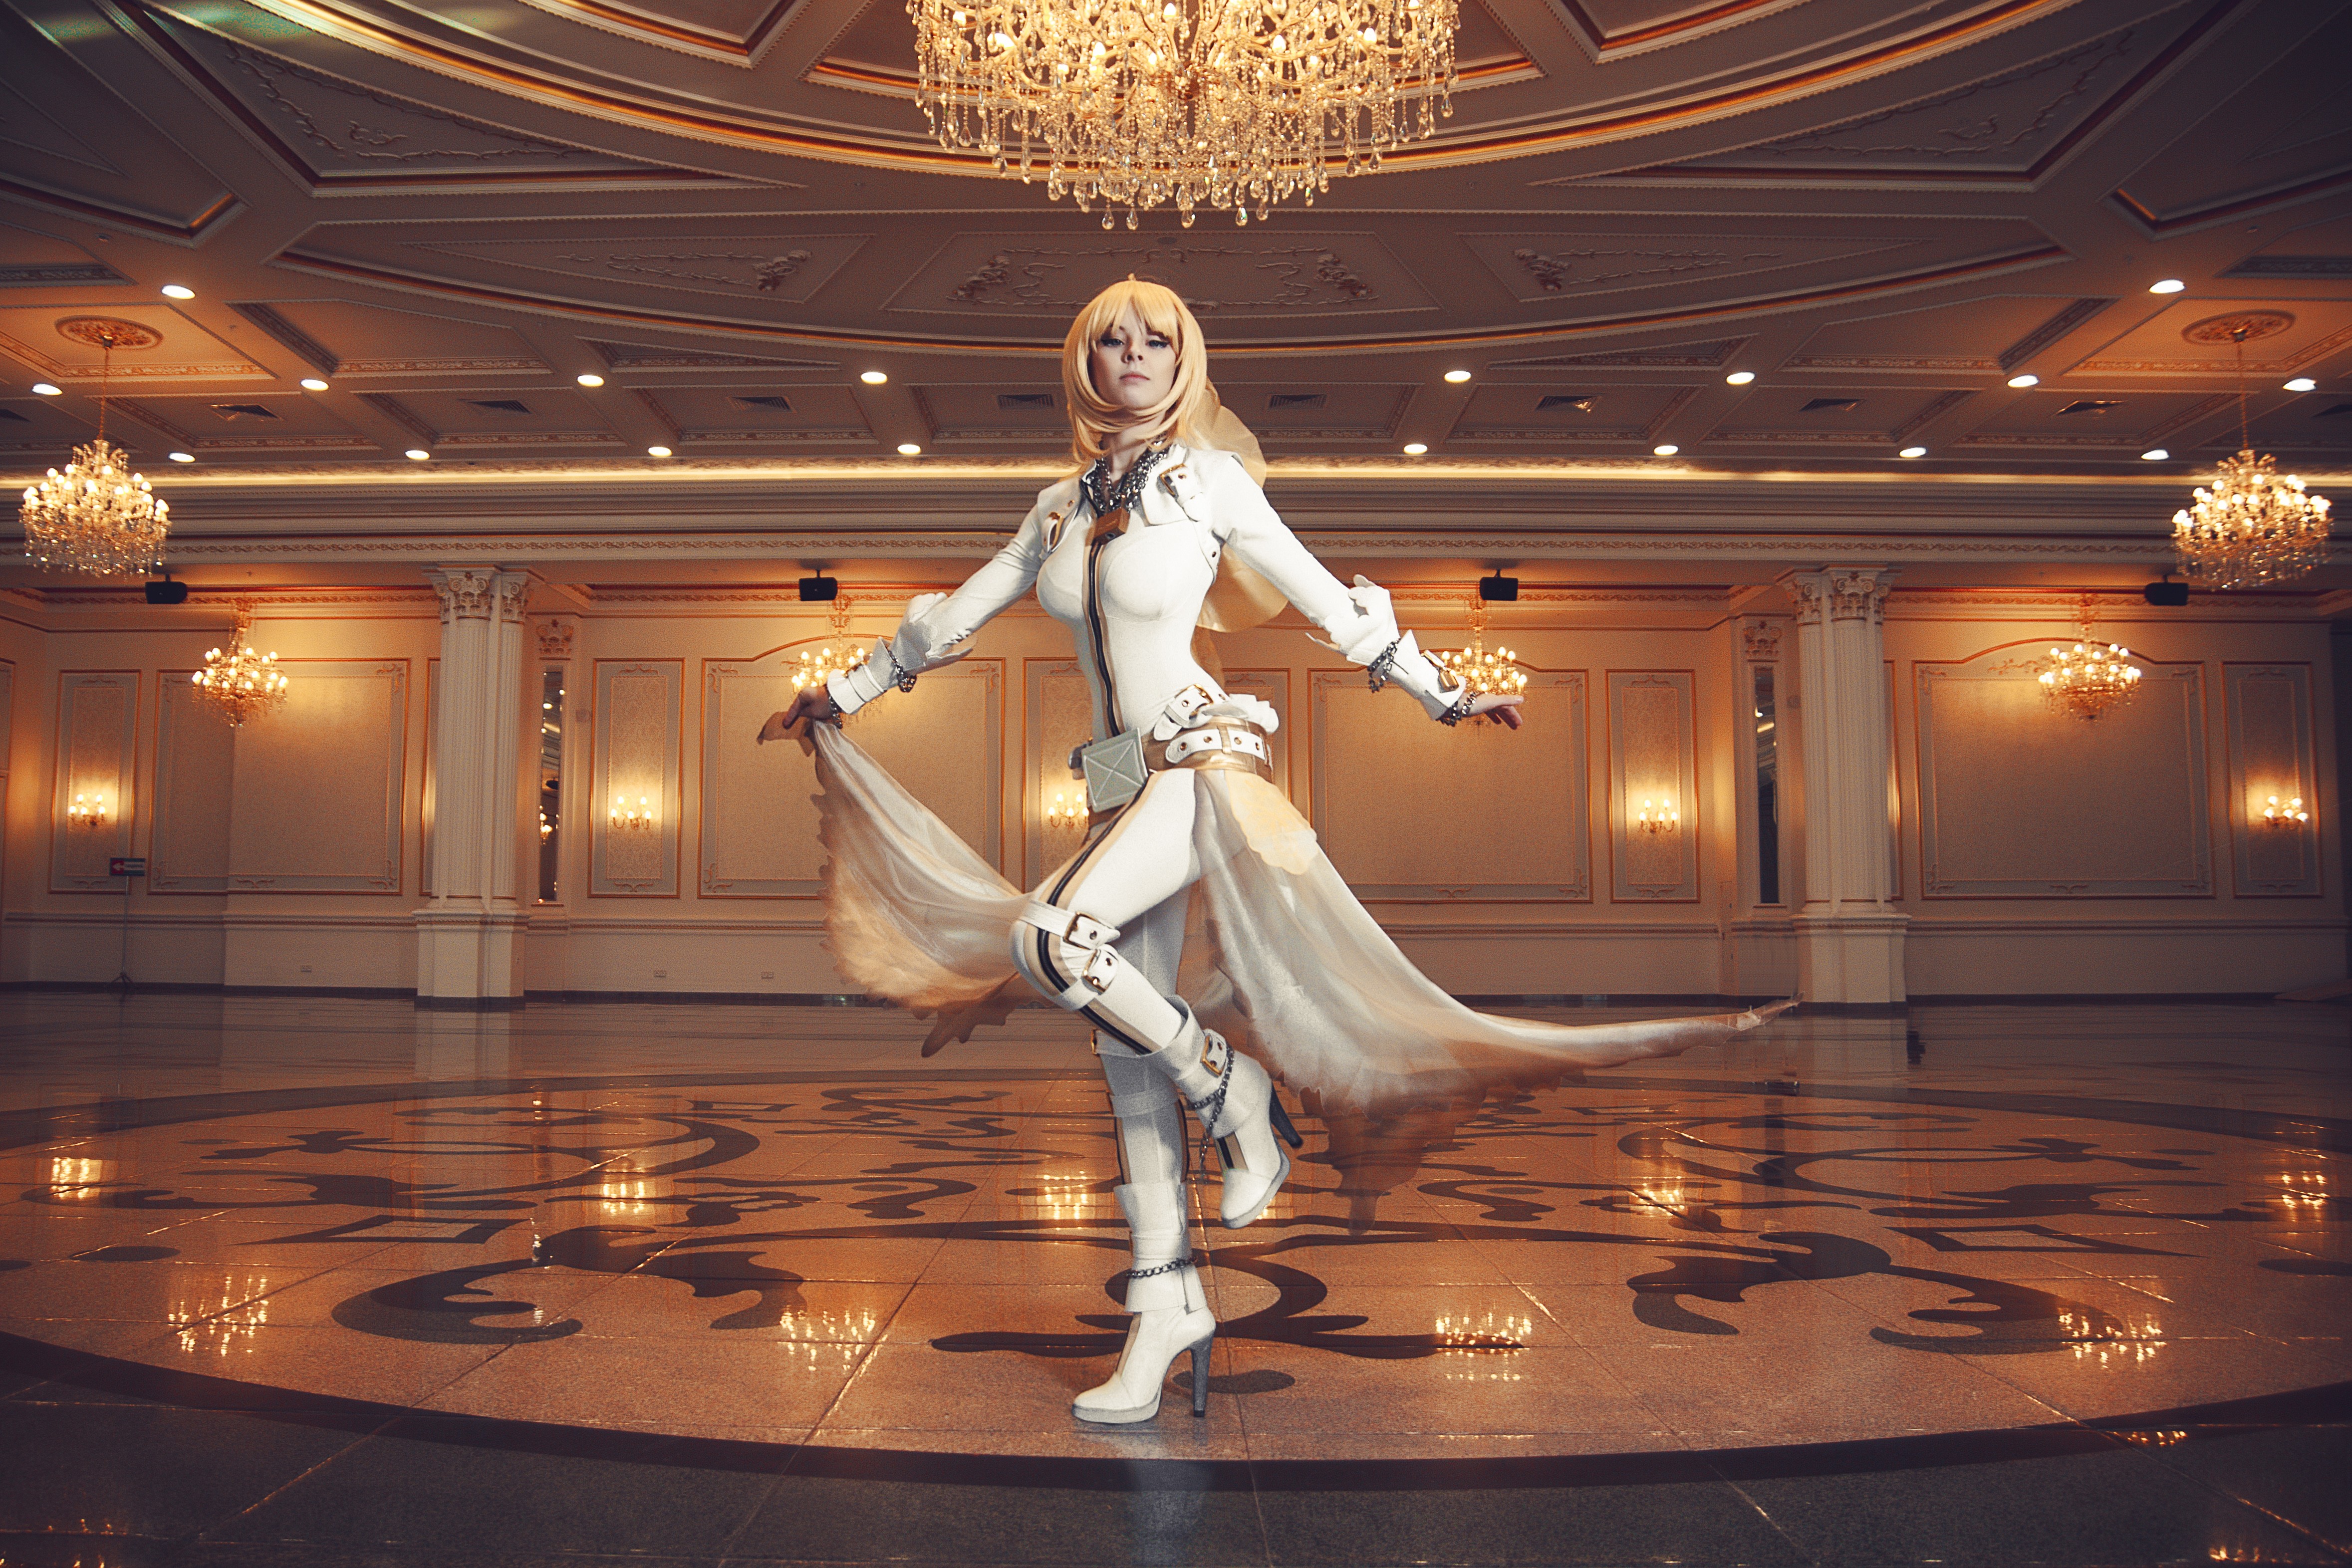 People 4713x3142 suits boots cosplay Saber Bride long hair blonde blue eyes leather boots leather clothing ballroom Helly von Valentine DeviantArt women indoors indoors model standing heels women